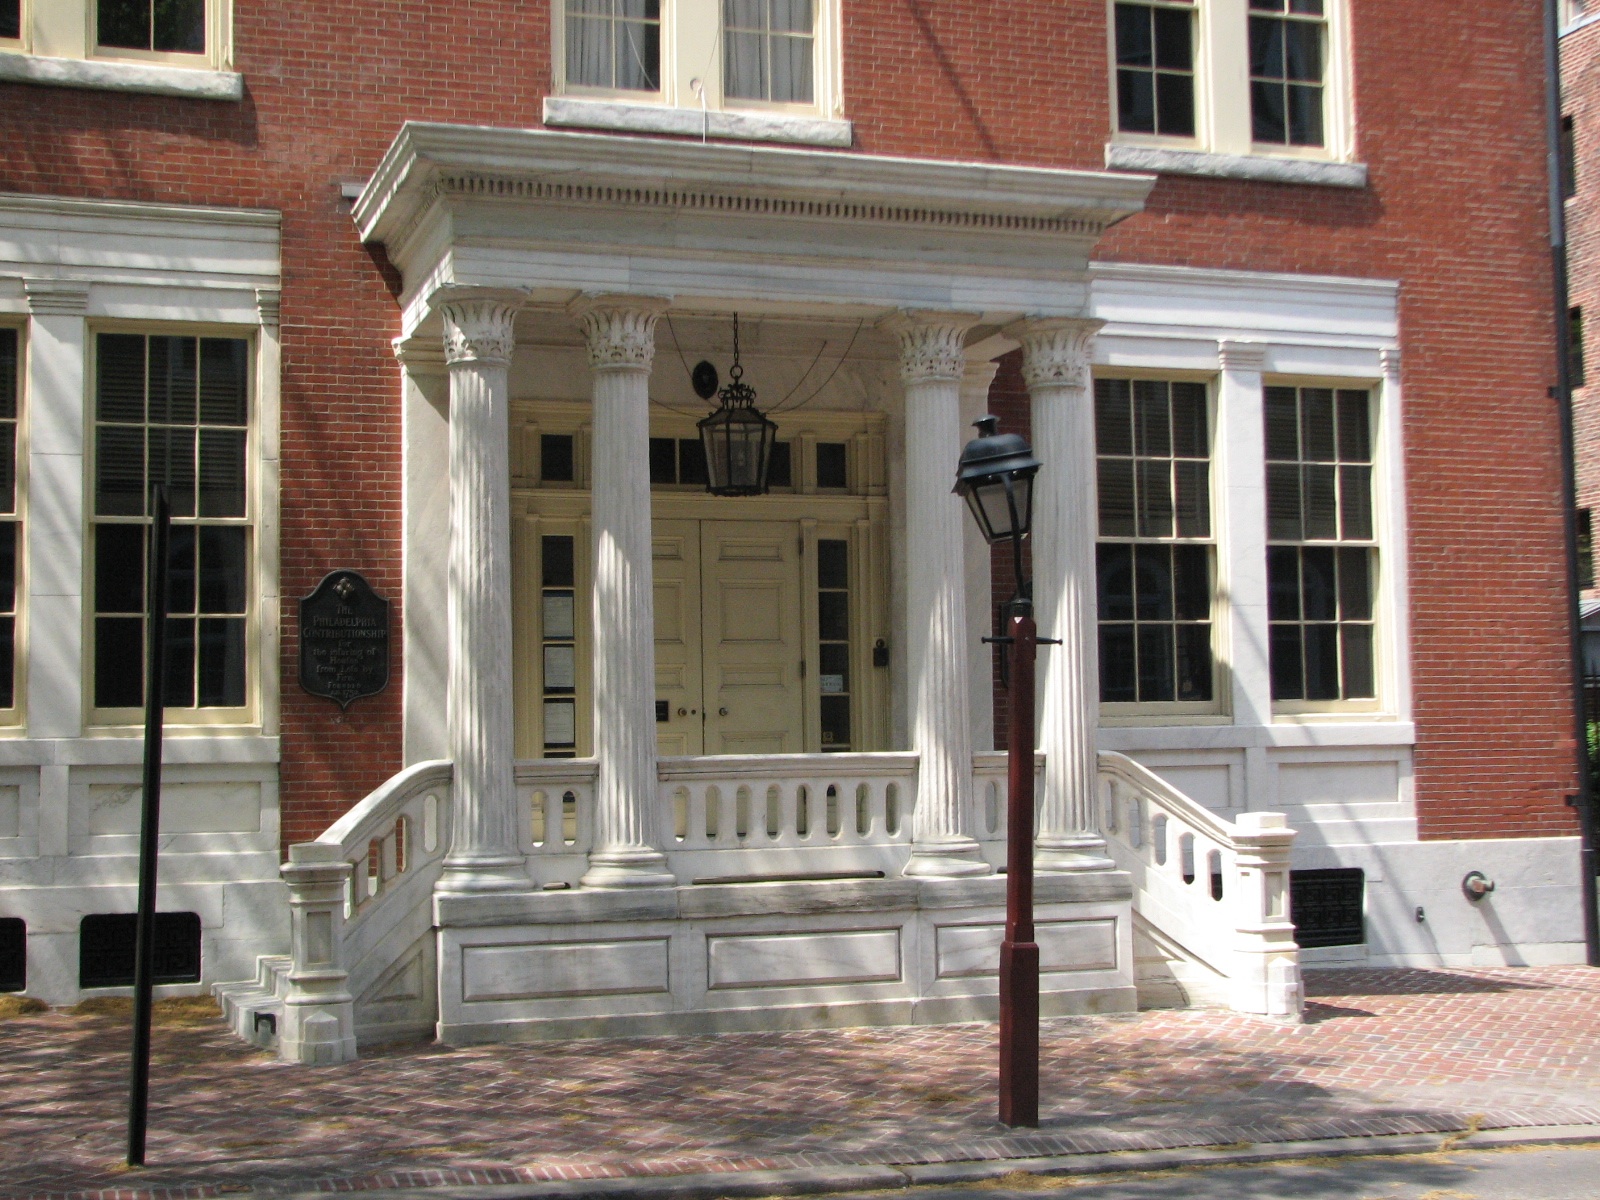 Walter used Corinthian columns for the entrance to the office and residence.